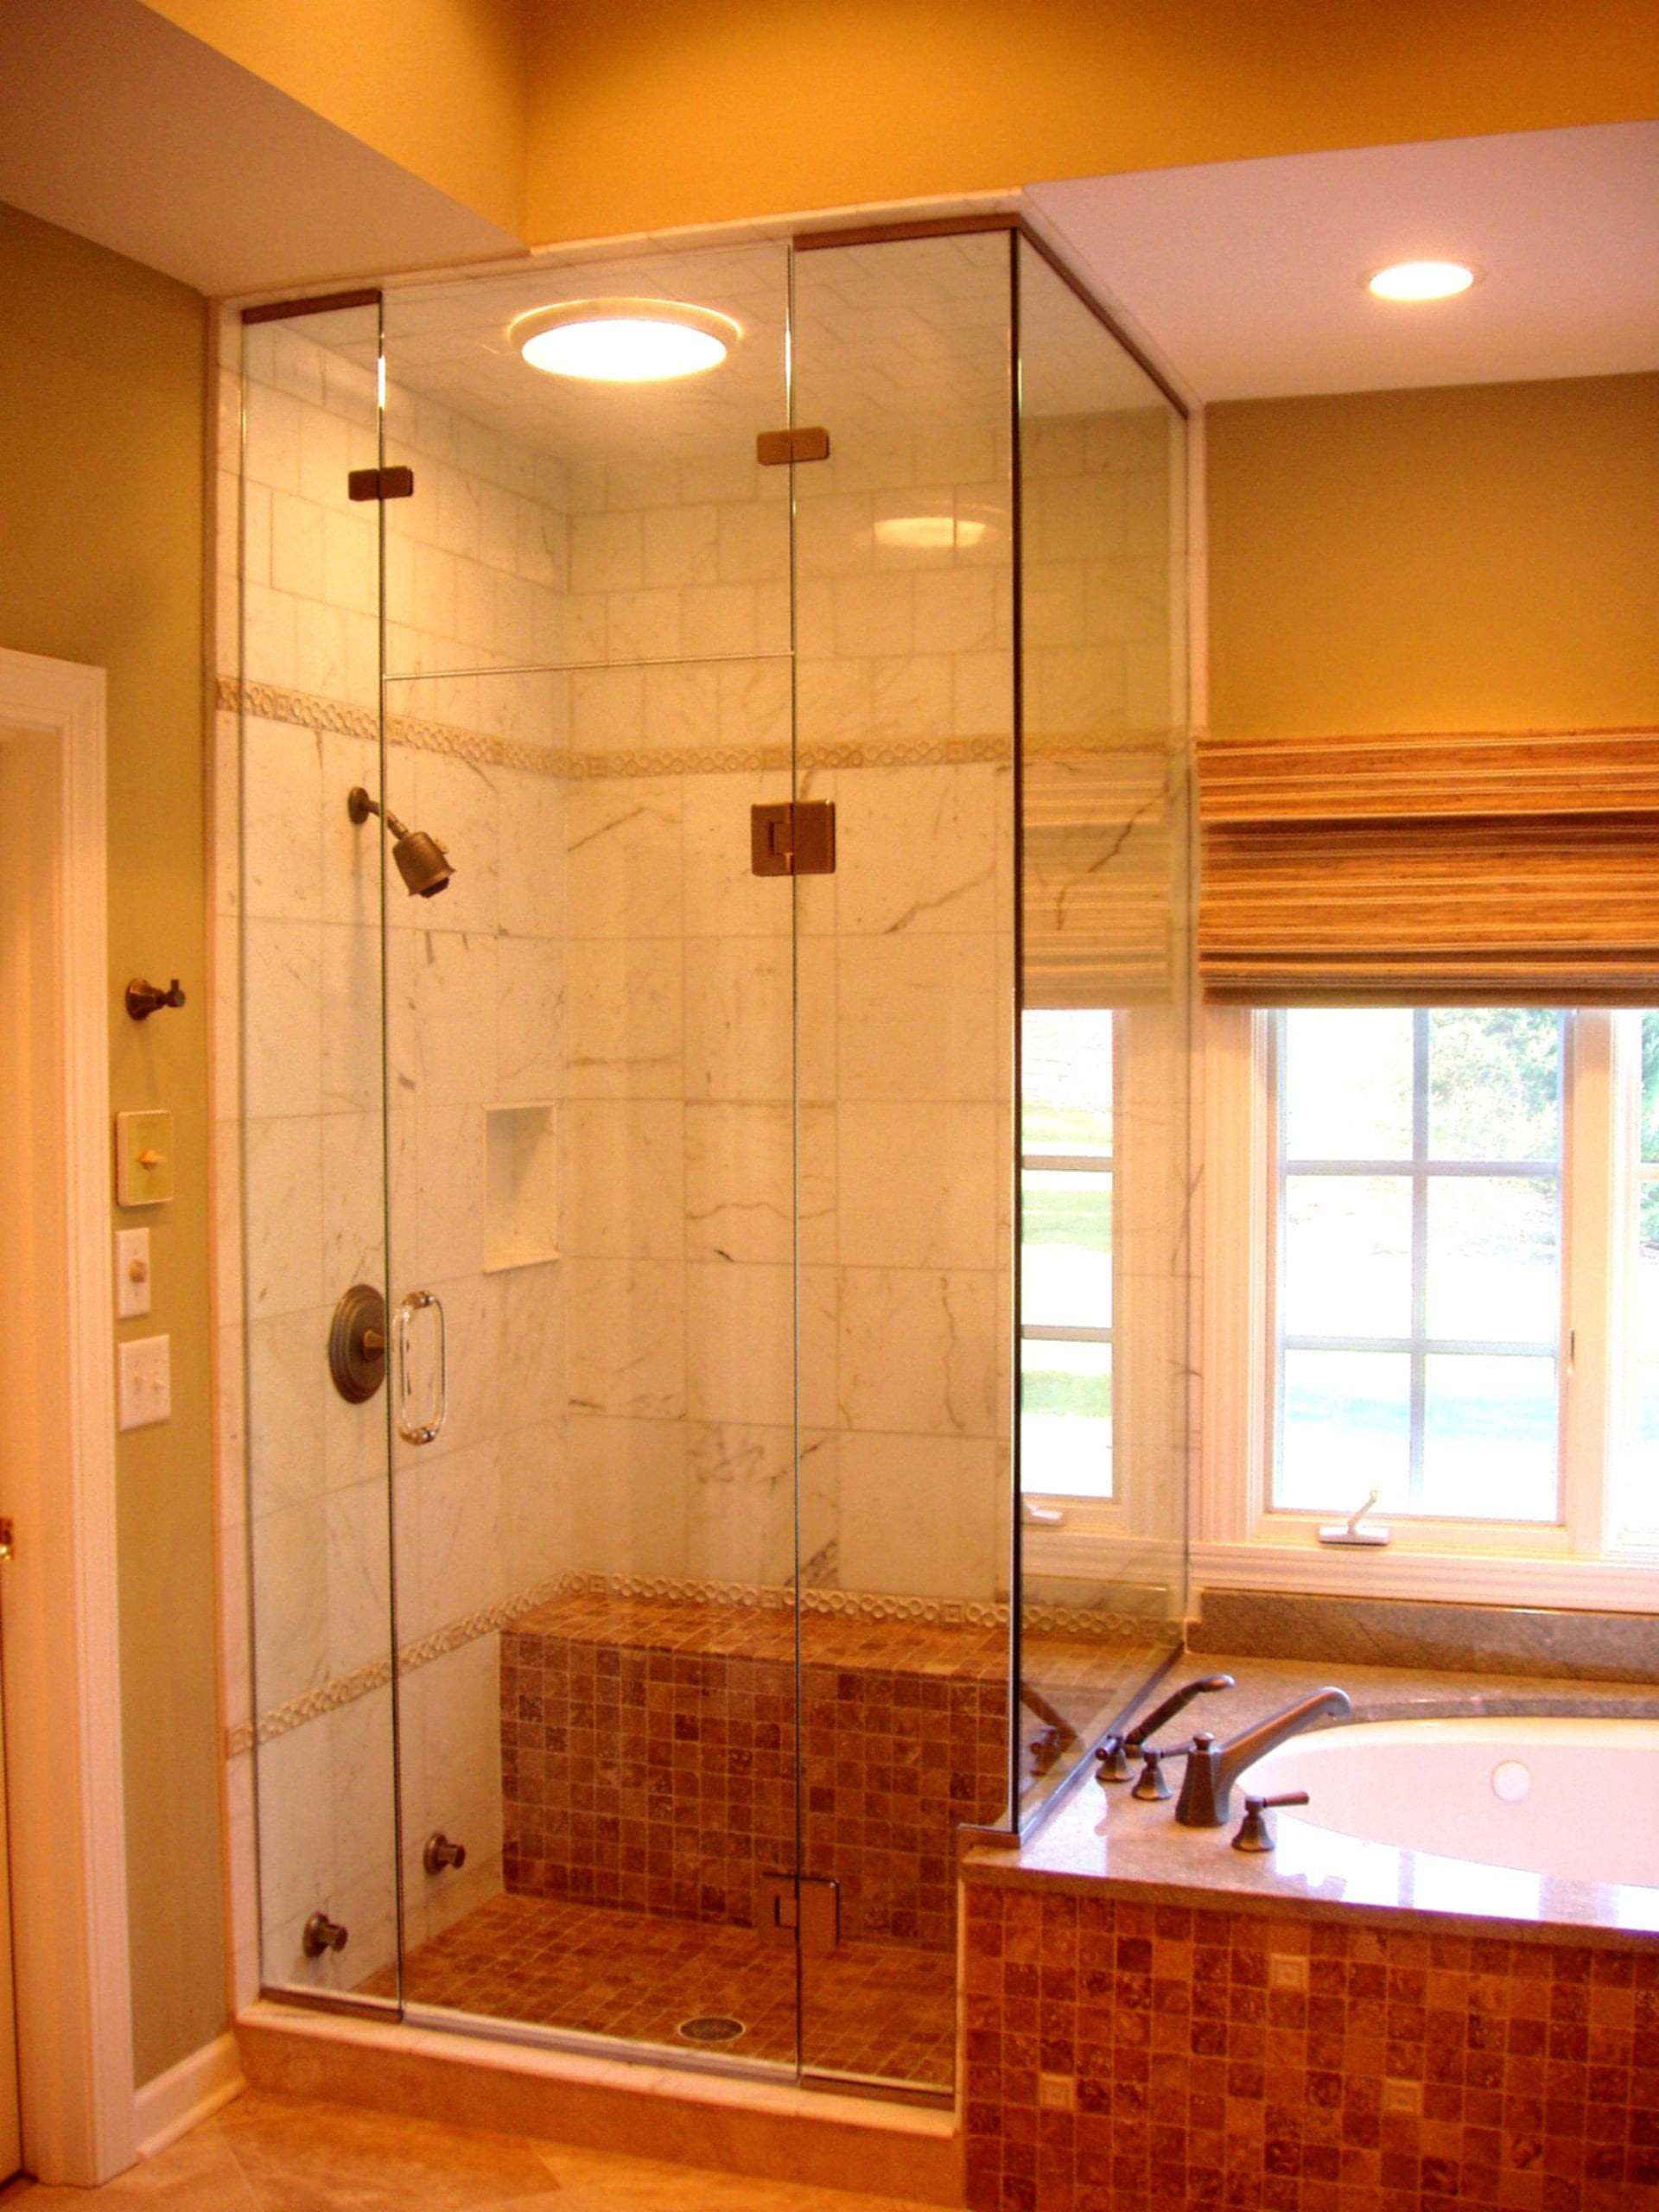 Bathroom Shower Stall Ideas
 Shower Stalls For Small Bathrooms – Loccie Better Homes